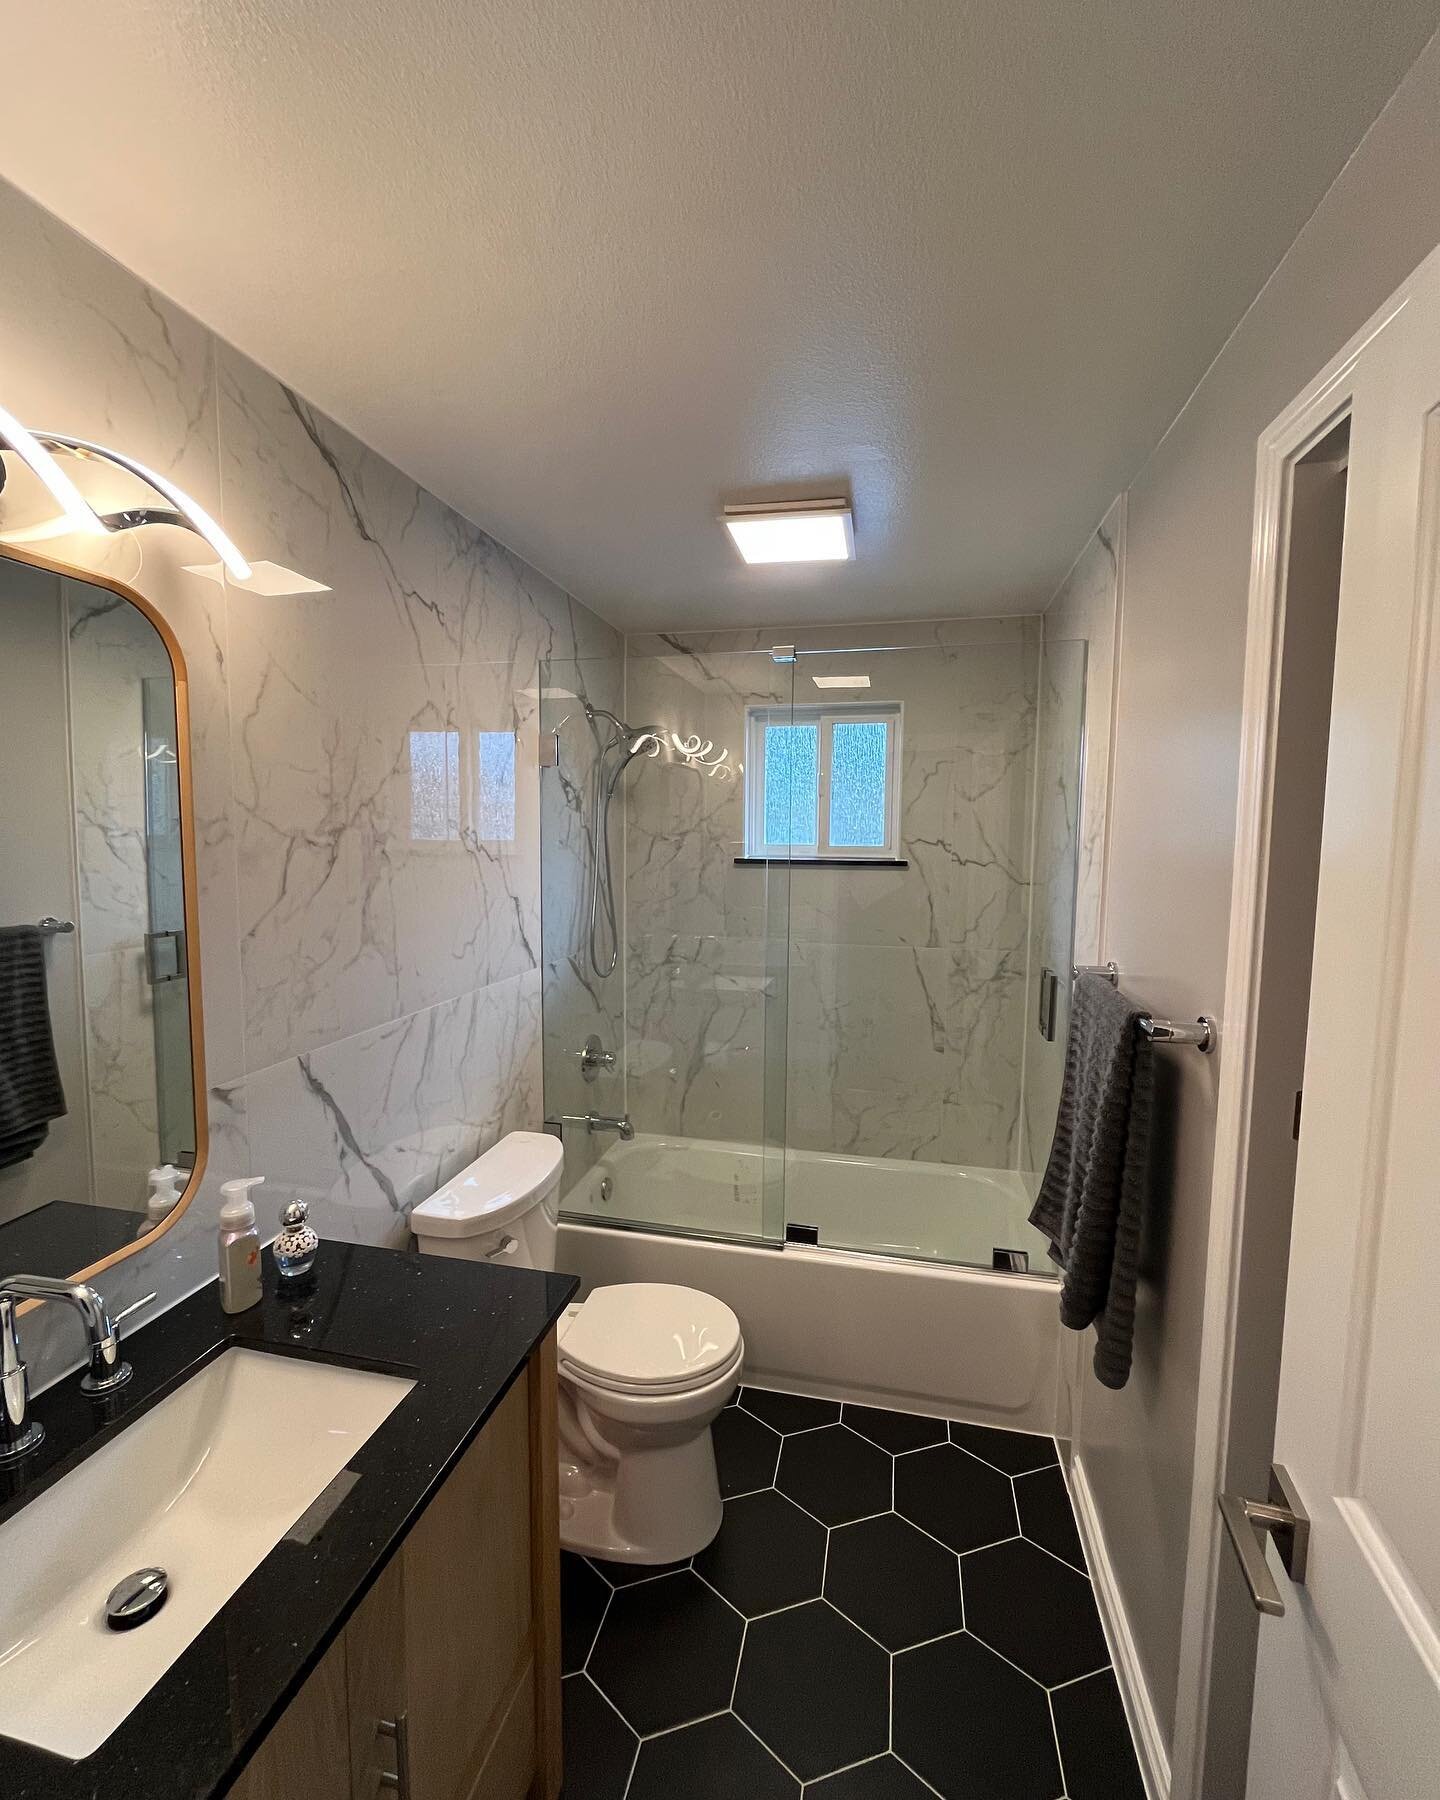 Frameless Slider on a tub shower enclosure. Installed by our technicians, Eddie and Marcus. 

#seattleshowers #seattleshower#seattleshowerdoors #framelessglassenclosure #framelessglassenclosures #showerenclosure #glassshowerenclosure #frameless #fram